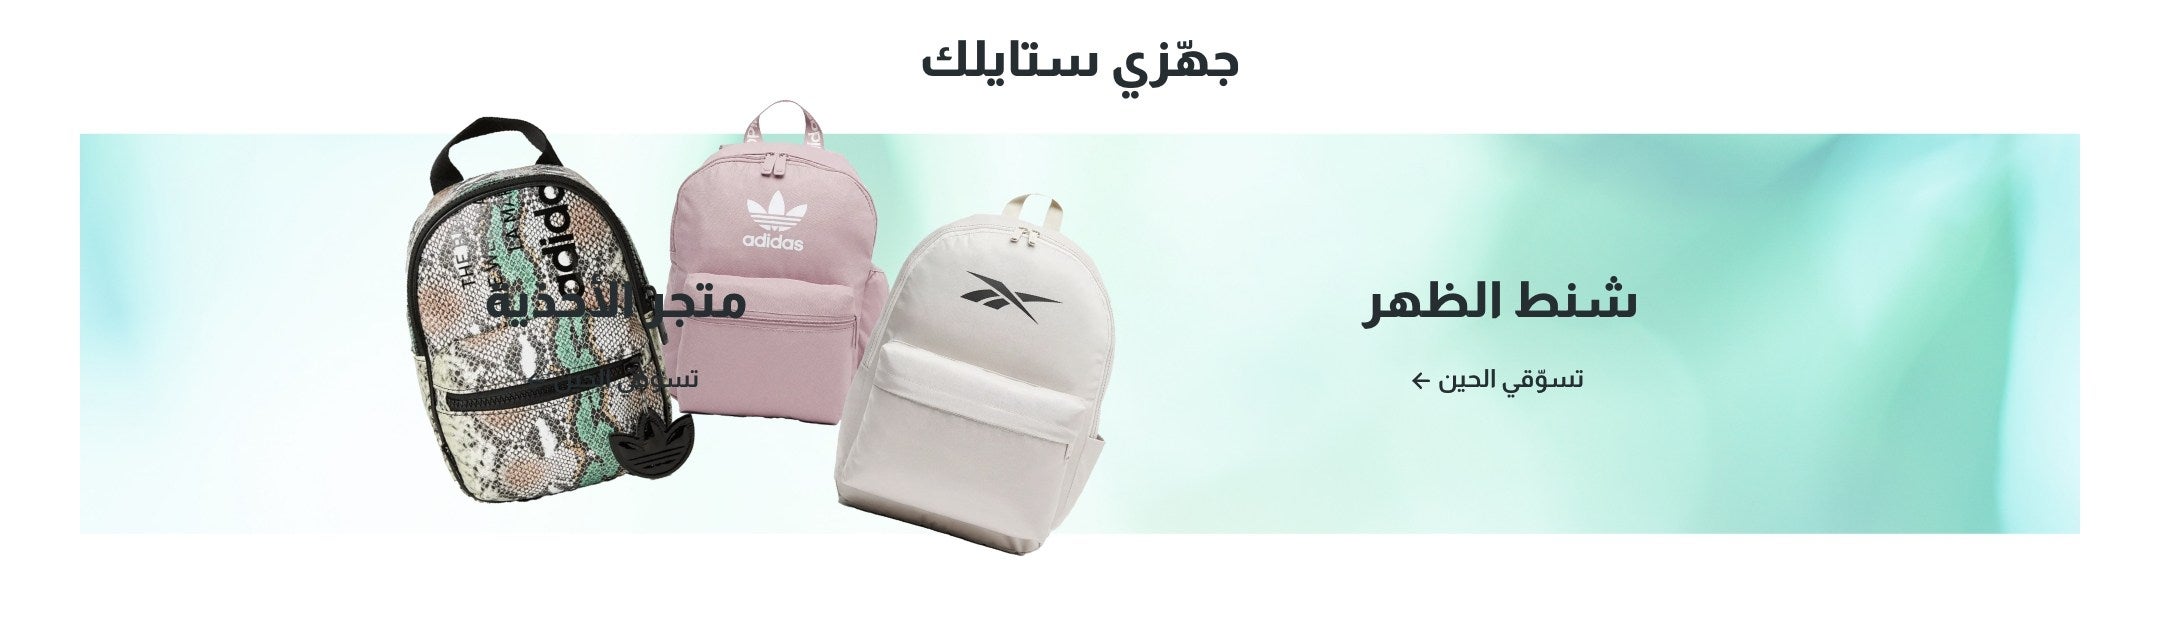 /womens-bags/sivvi-backpacks?page=1&f[occasion]=sport